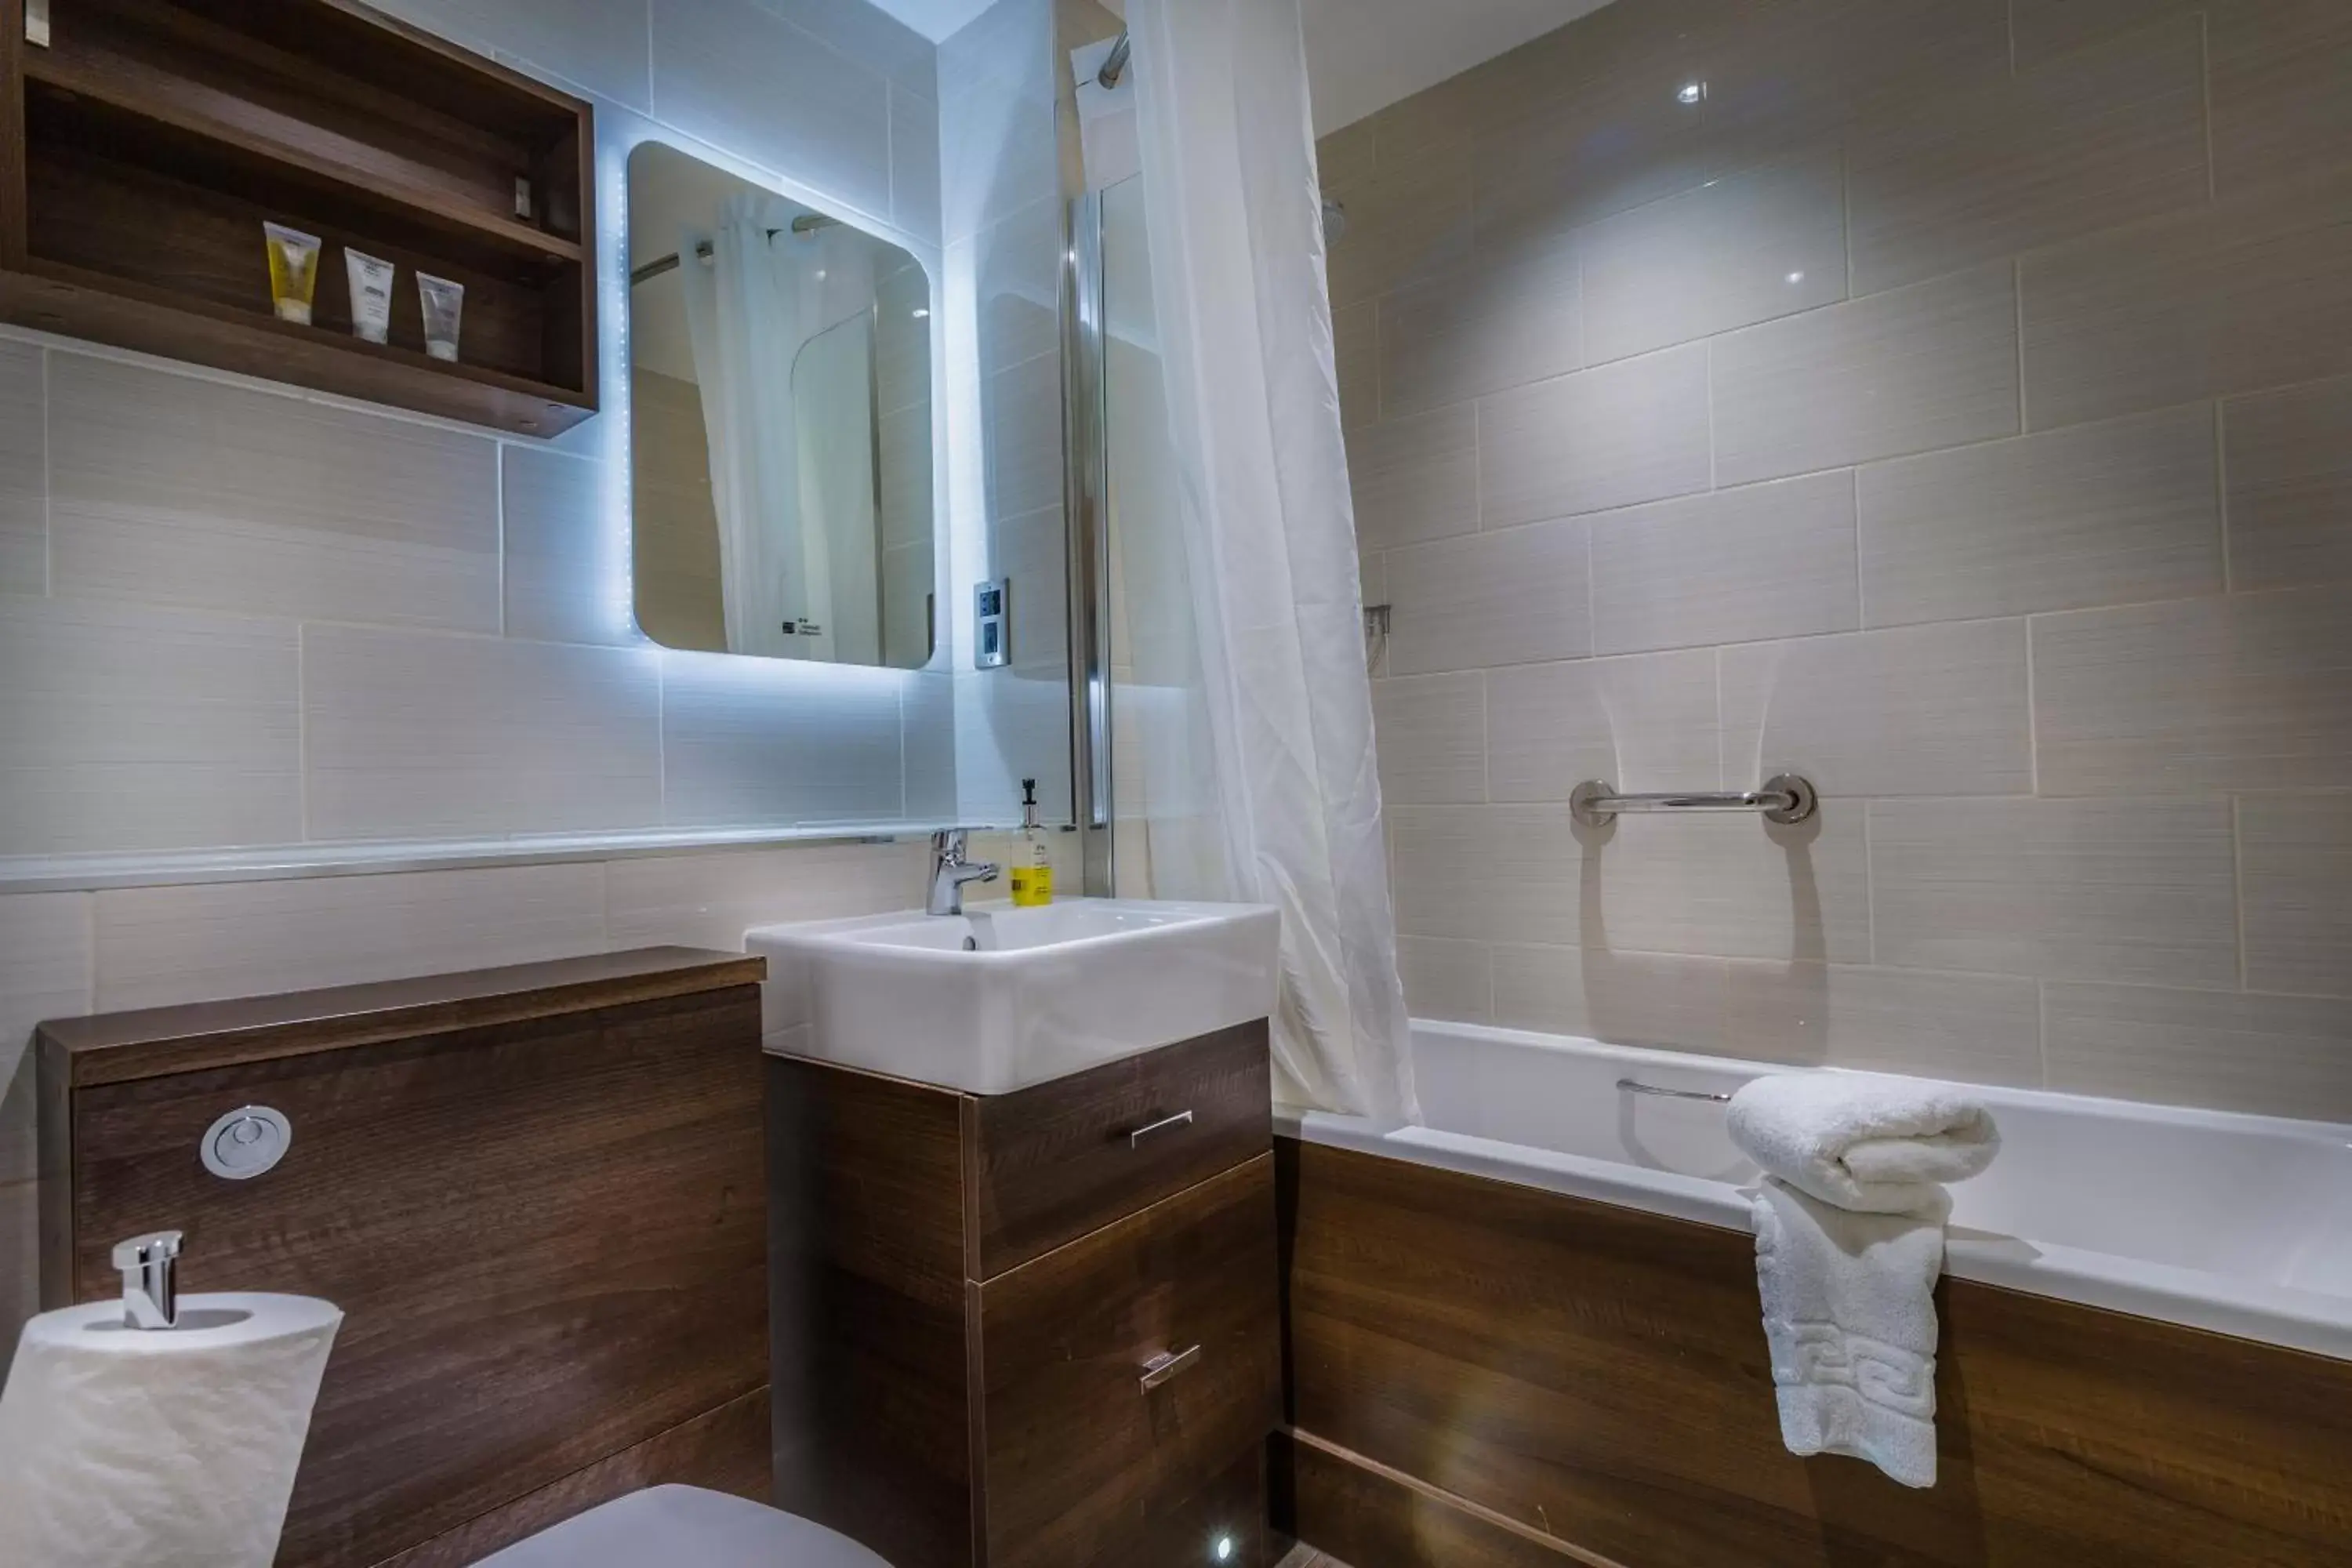 Bathroom in The Admiral Rodney Hotel, Horncastle, Lincolnshire